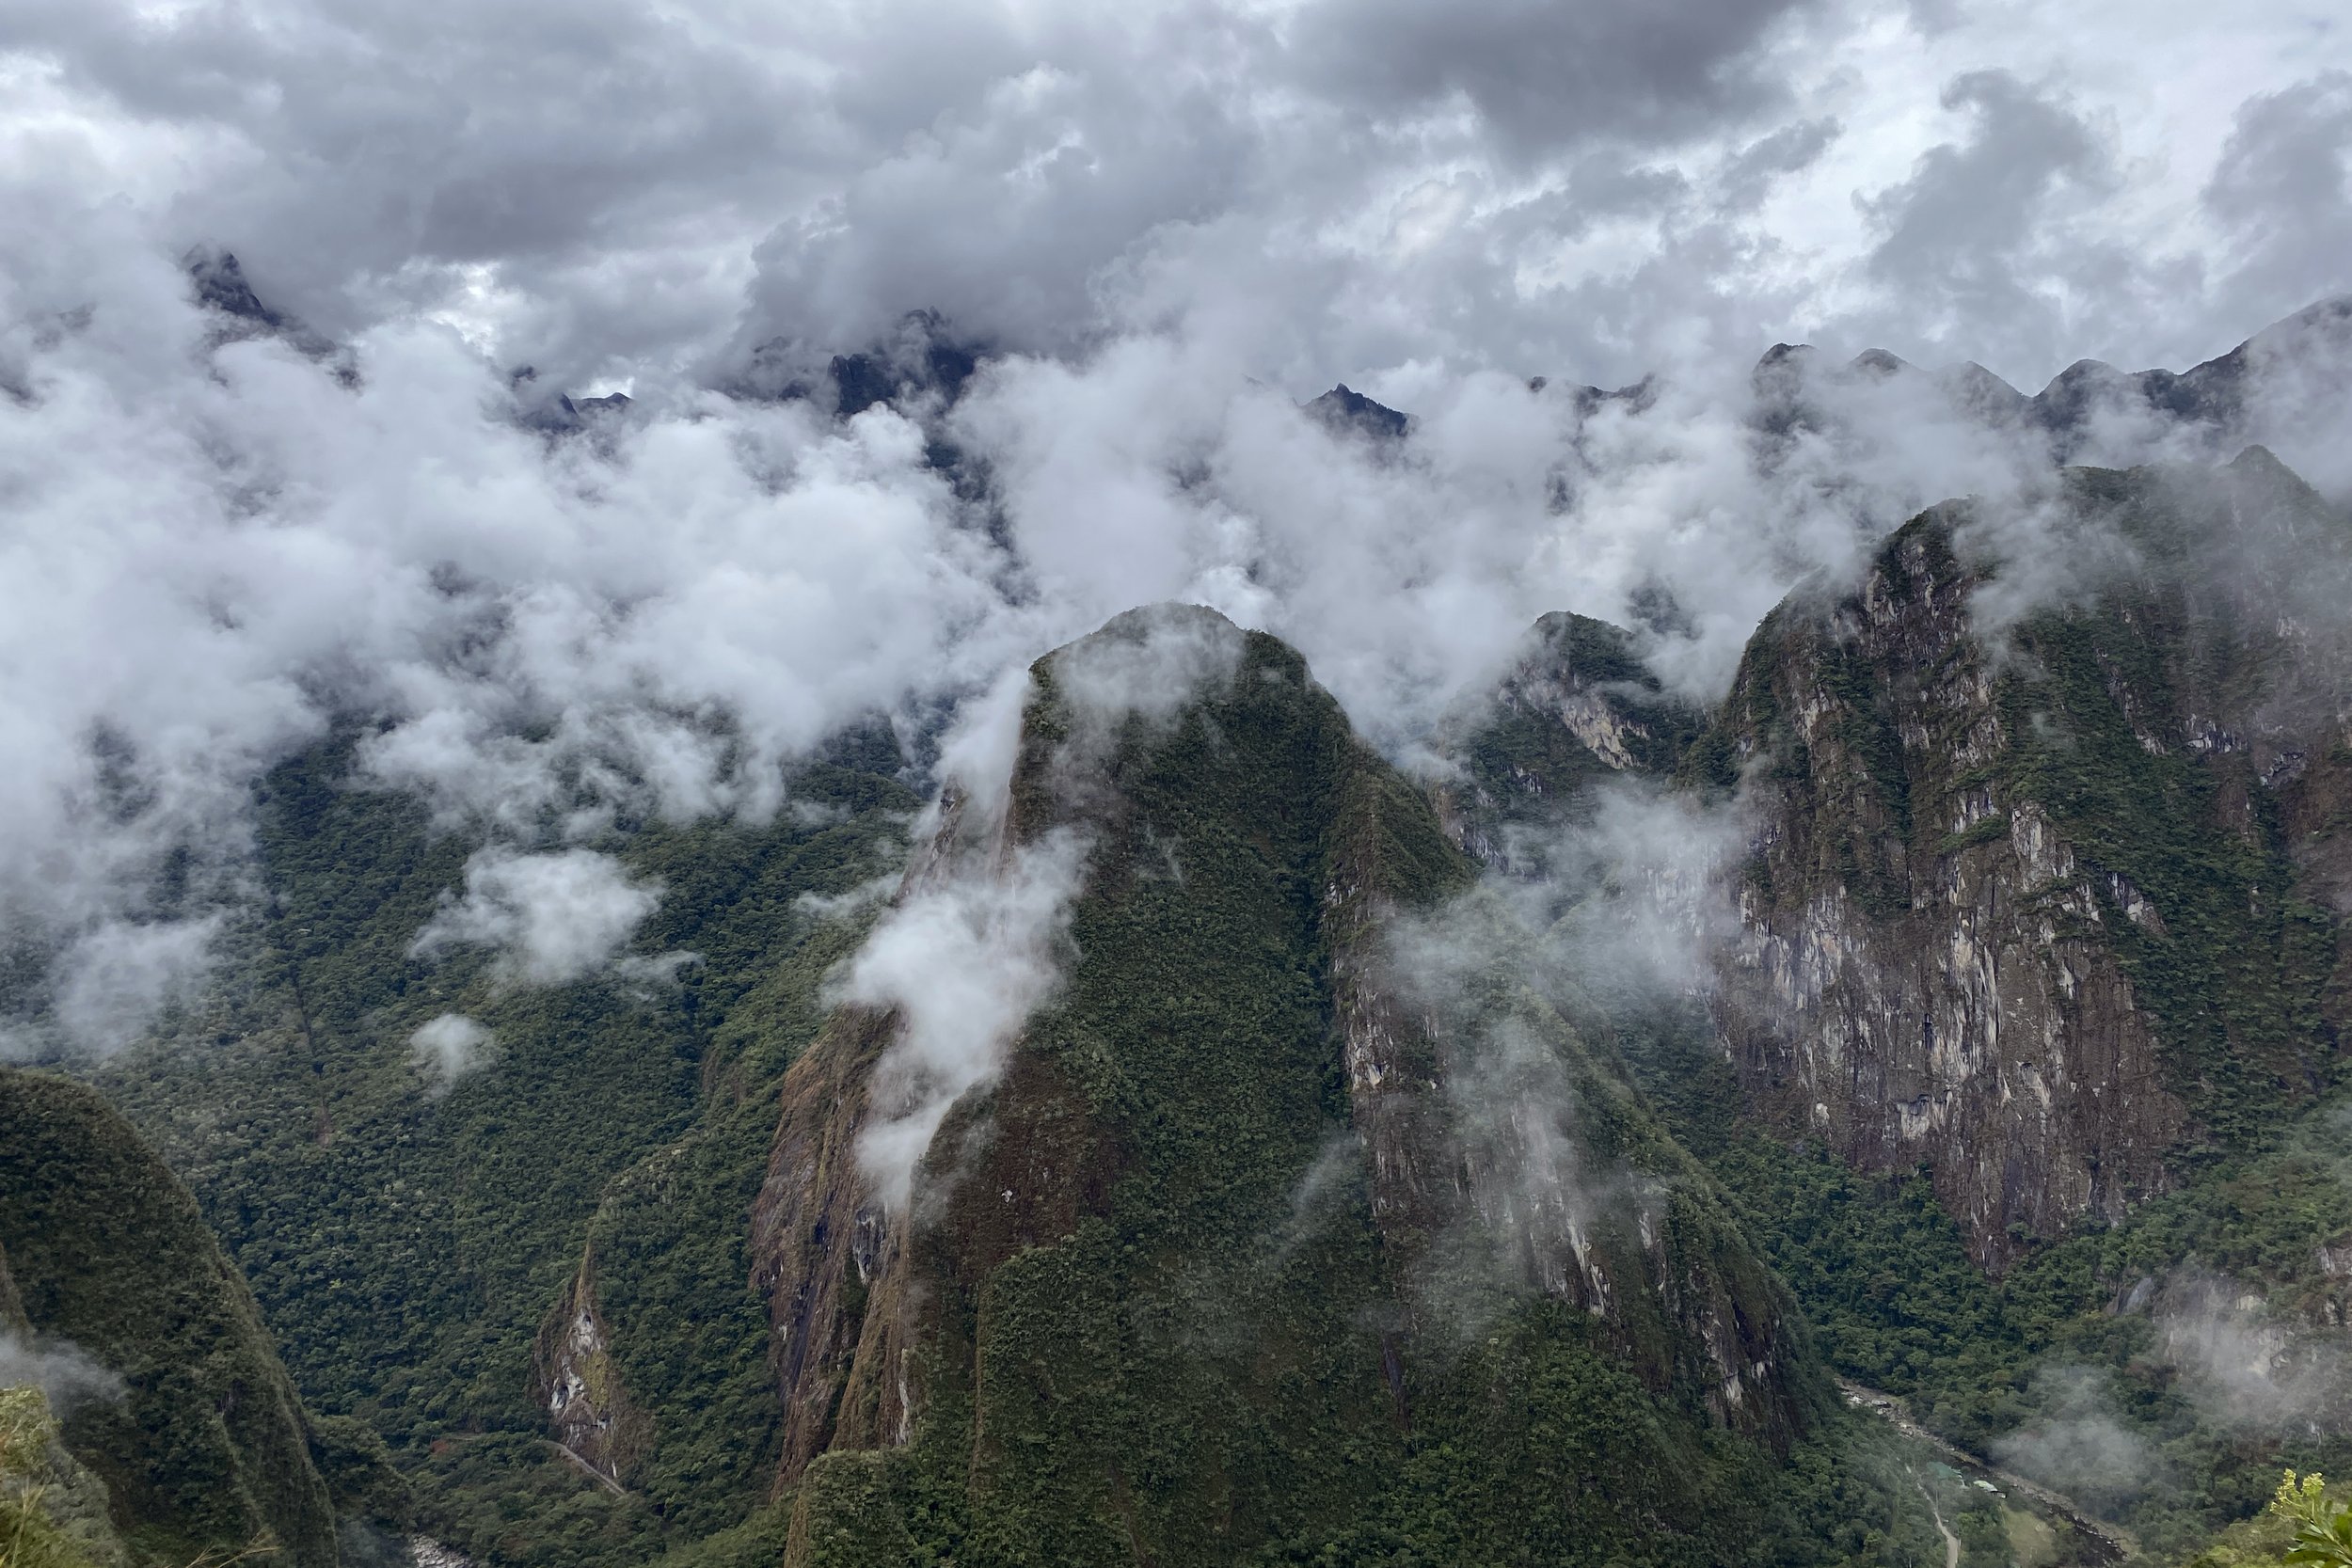  Clouds above the Andes Mountains in Peru.  